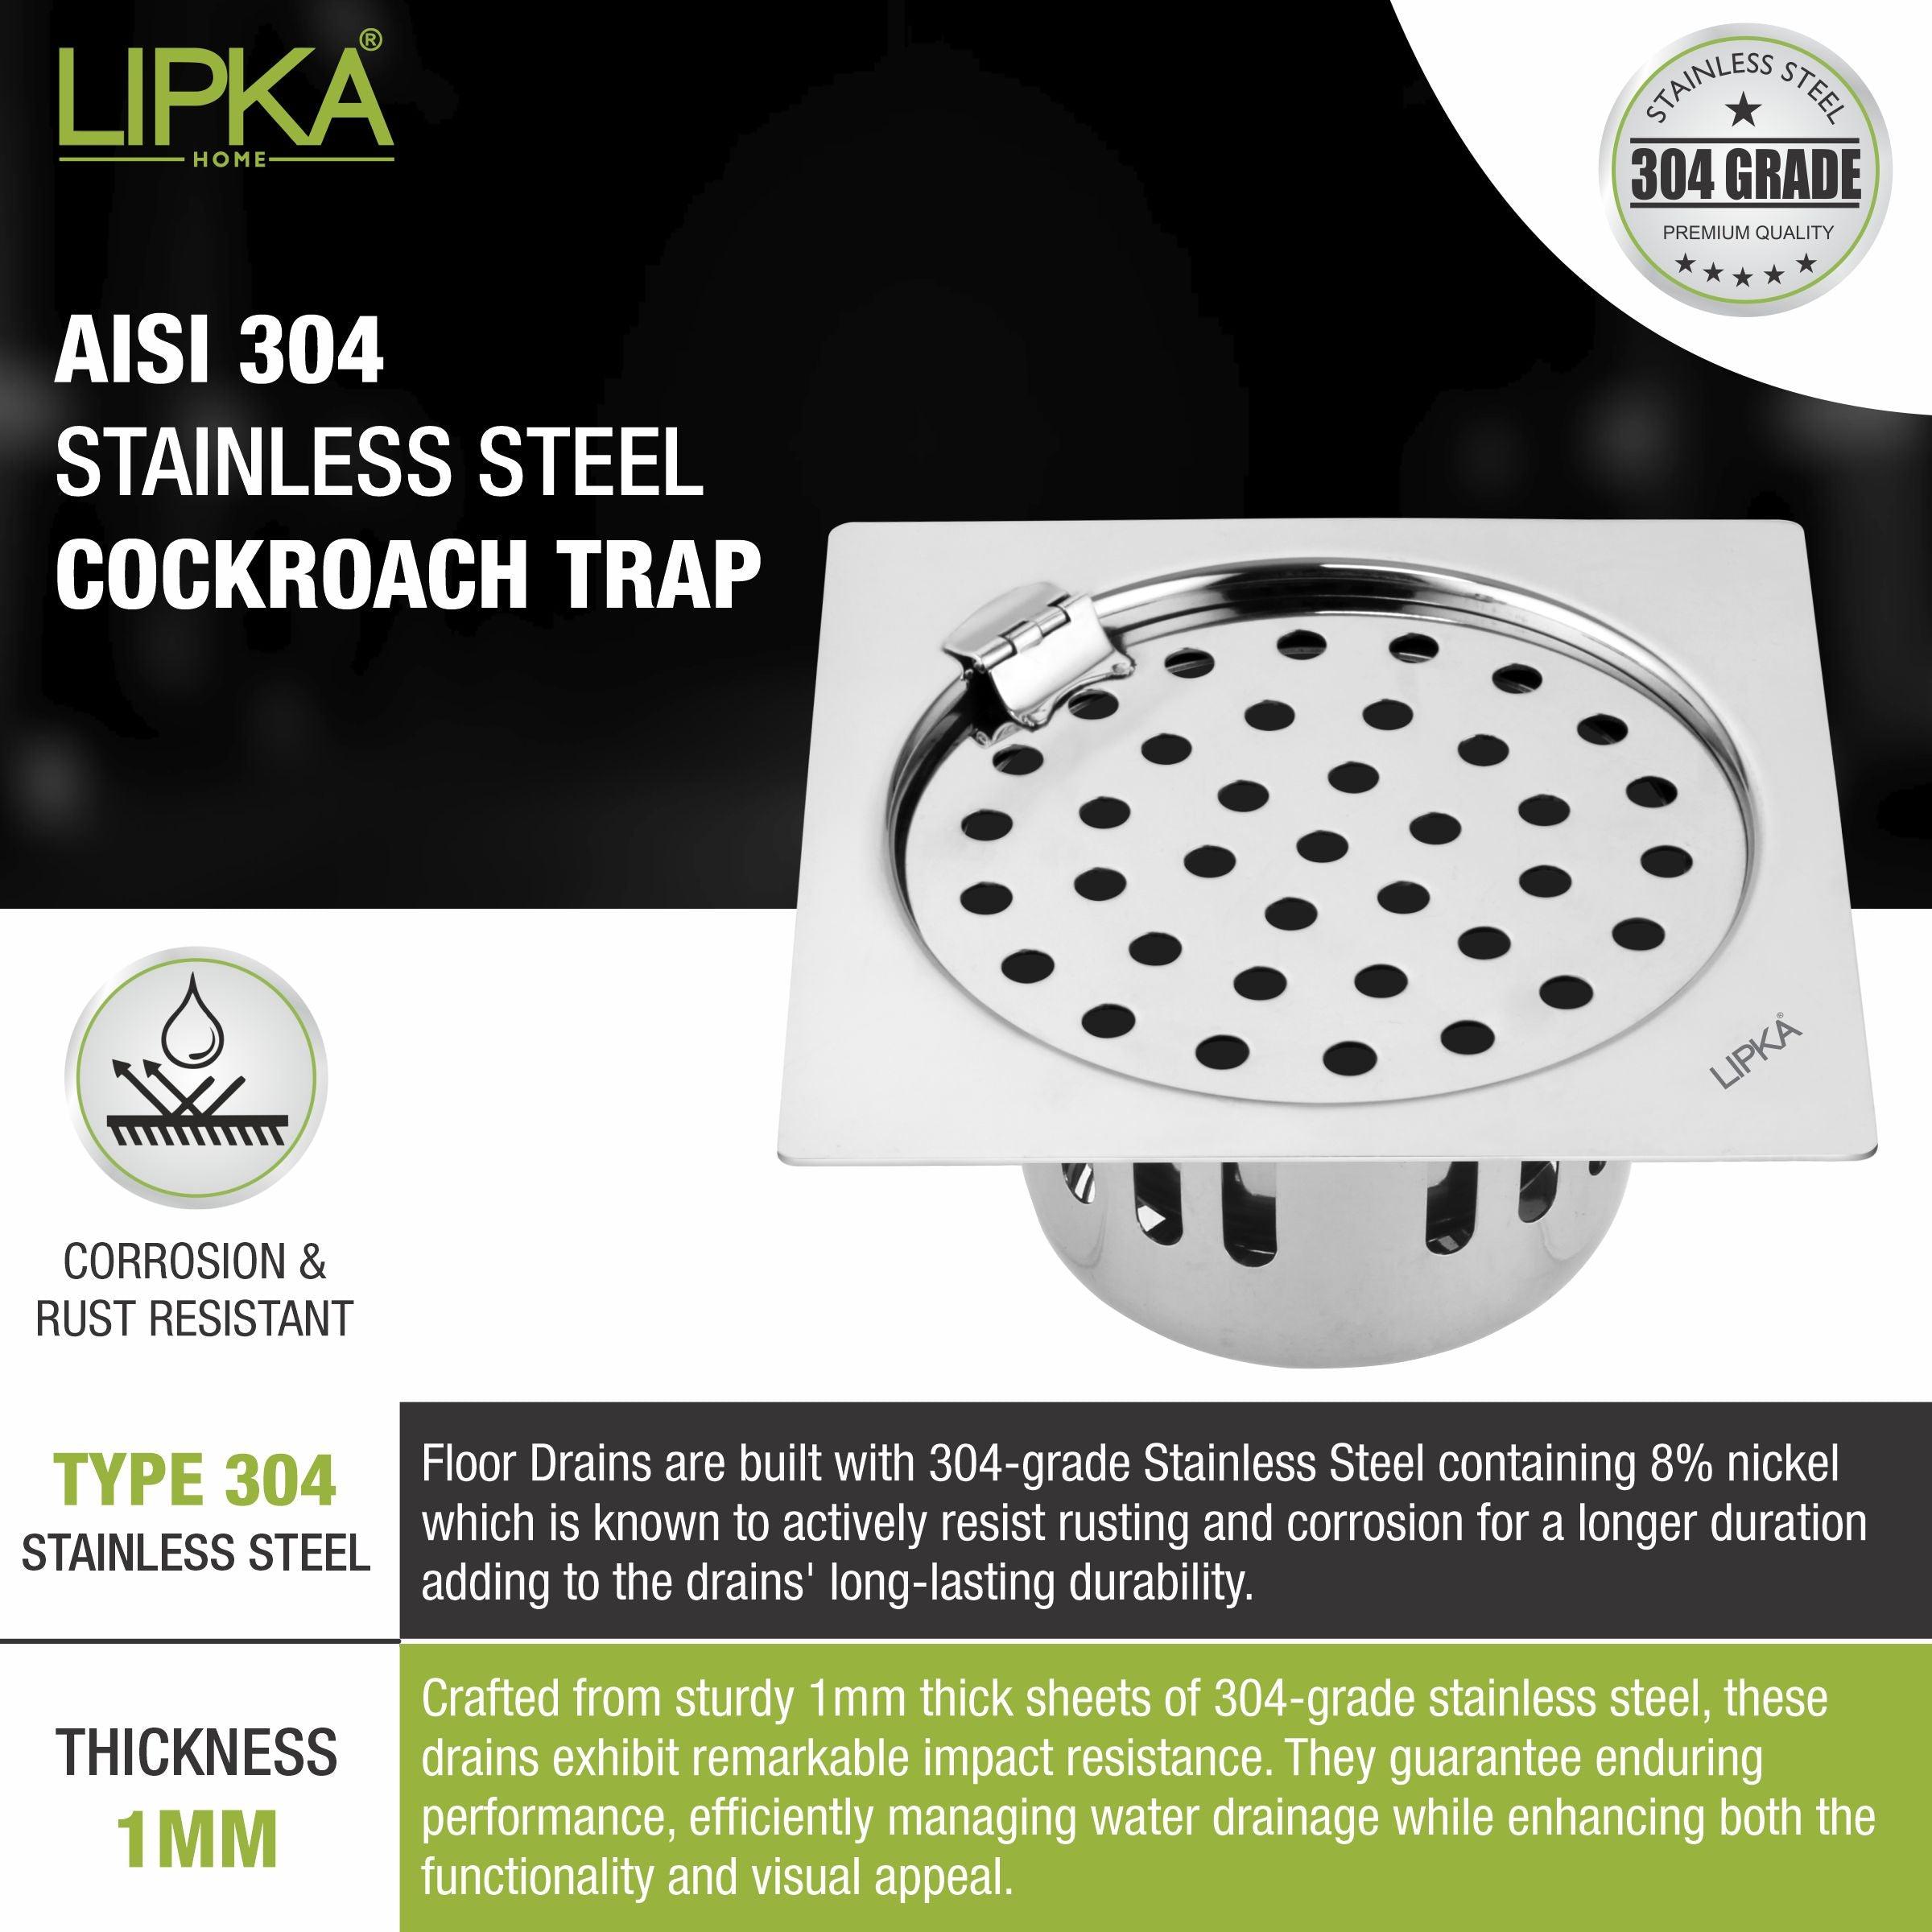 Square Flat Cut Floor Drain (6 x 6 Inches) with Hinge and Cockroach Trap - LIPKA